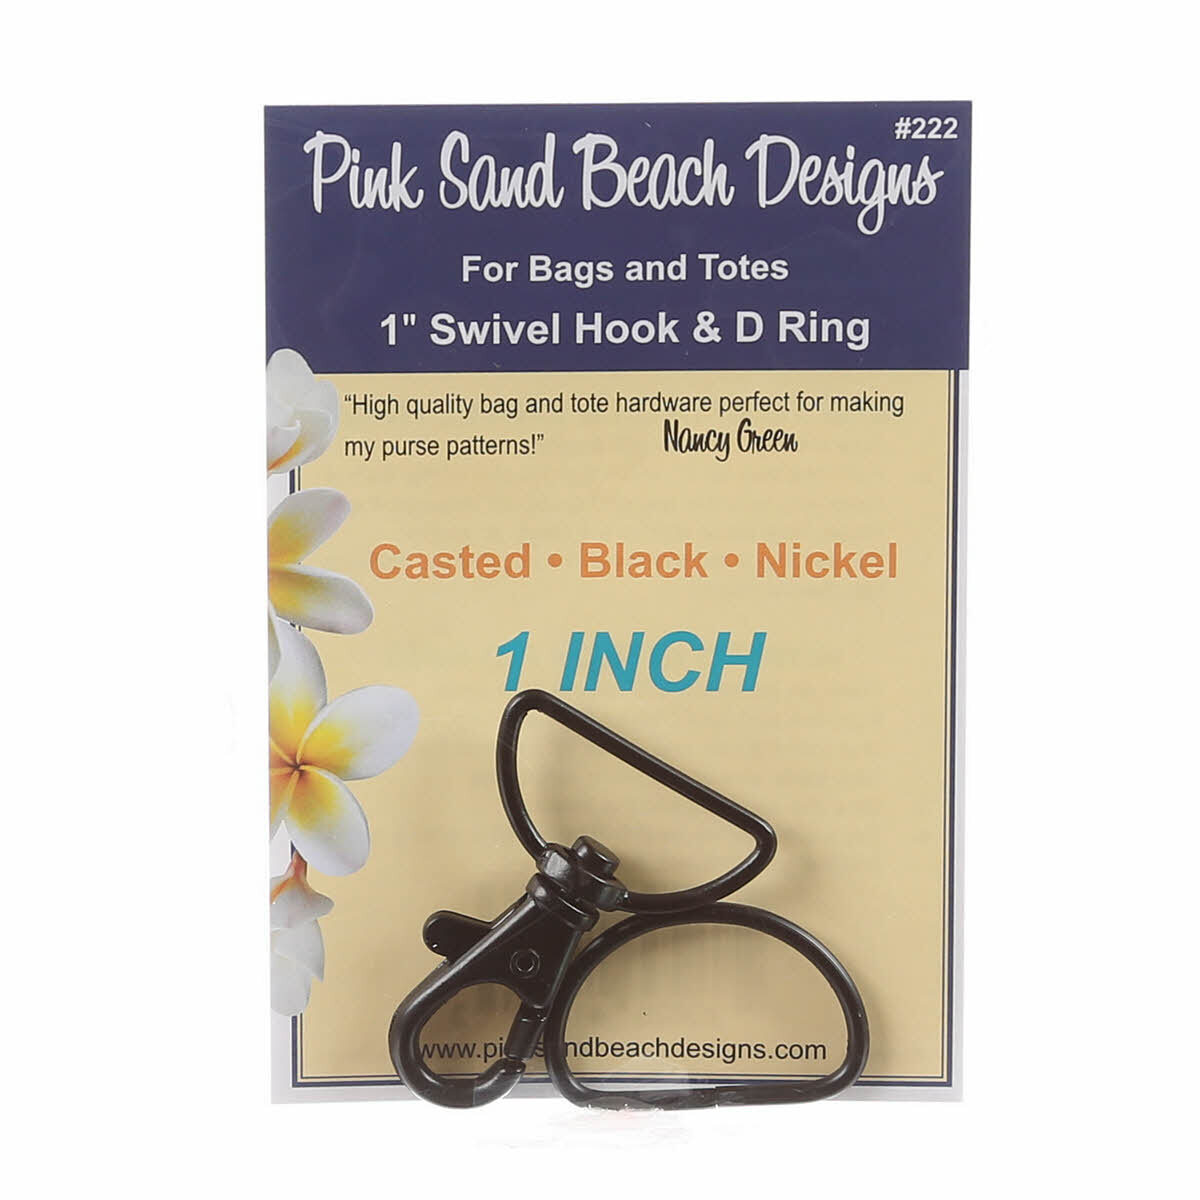 Swivel Hook and D Ring - Black Nickel 1-inch